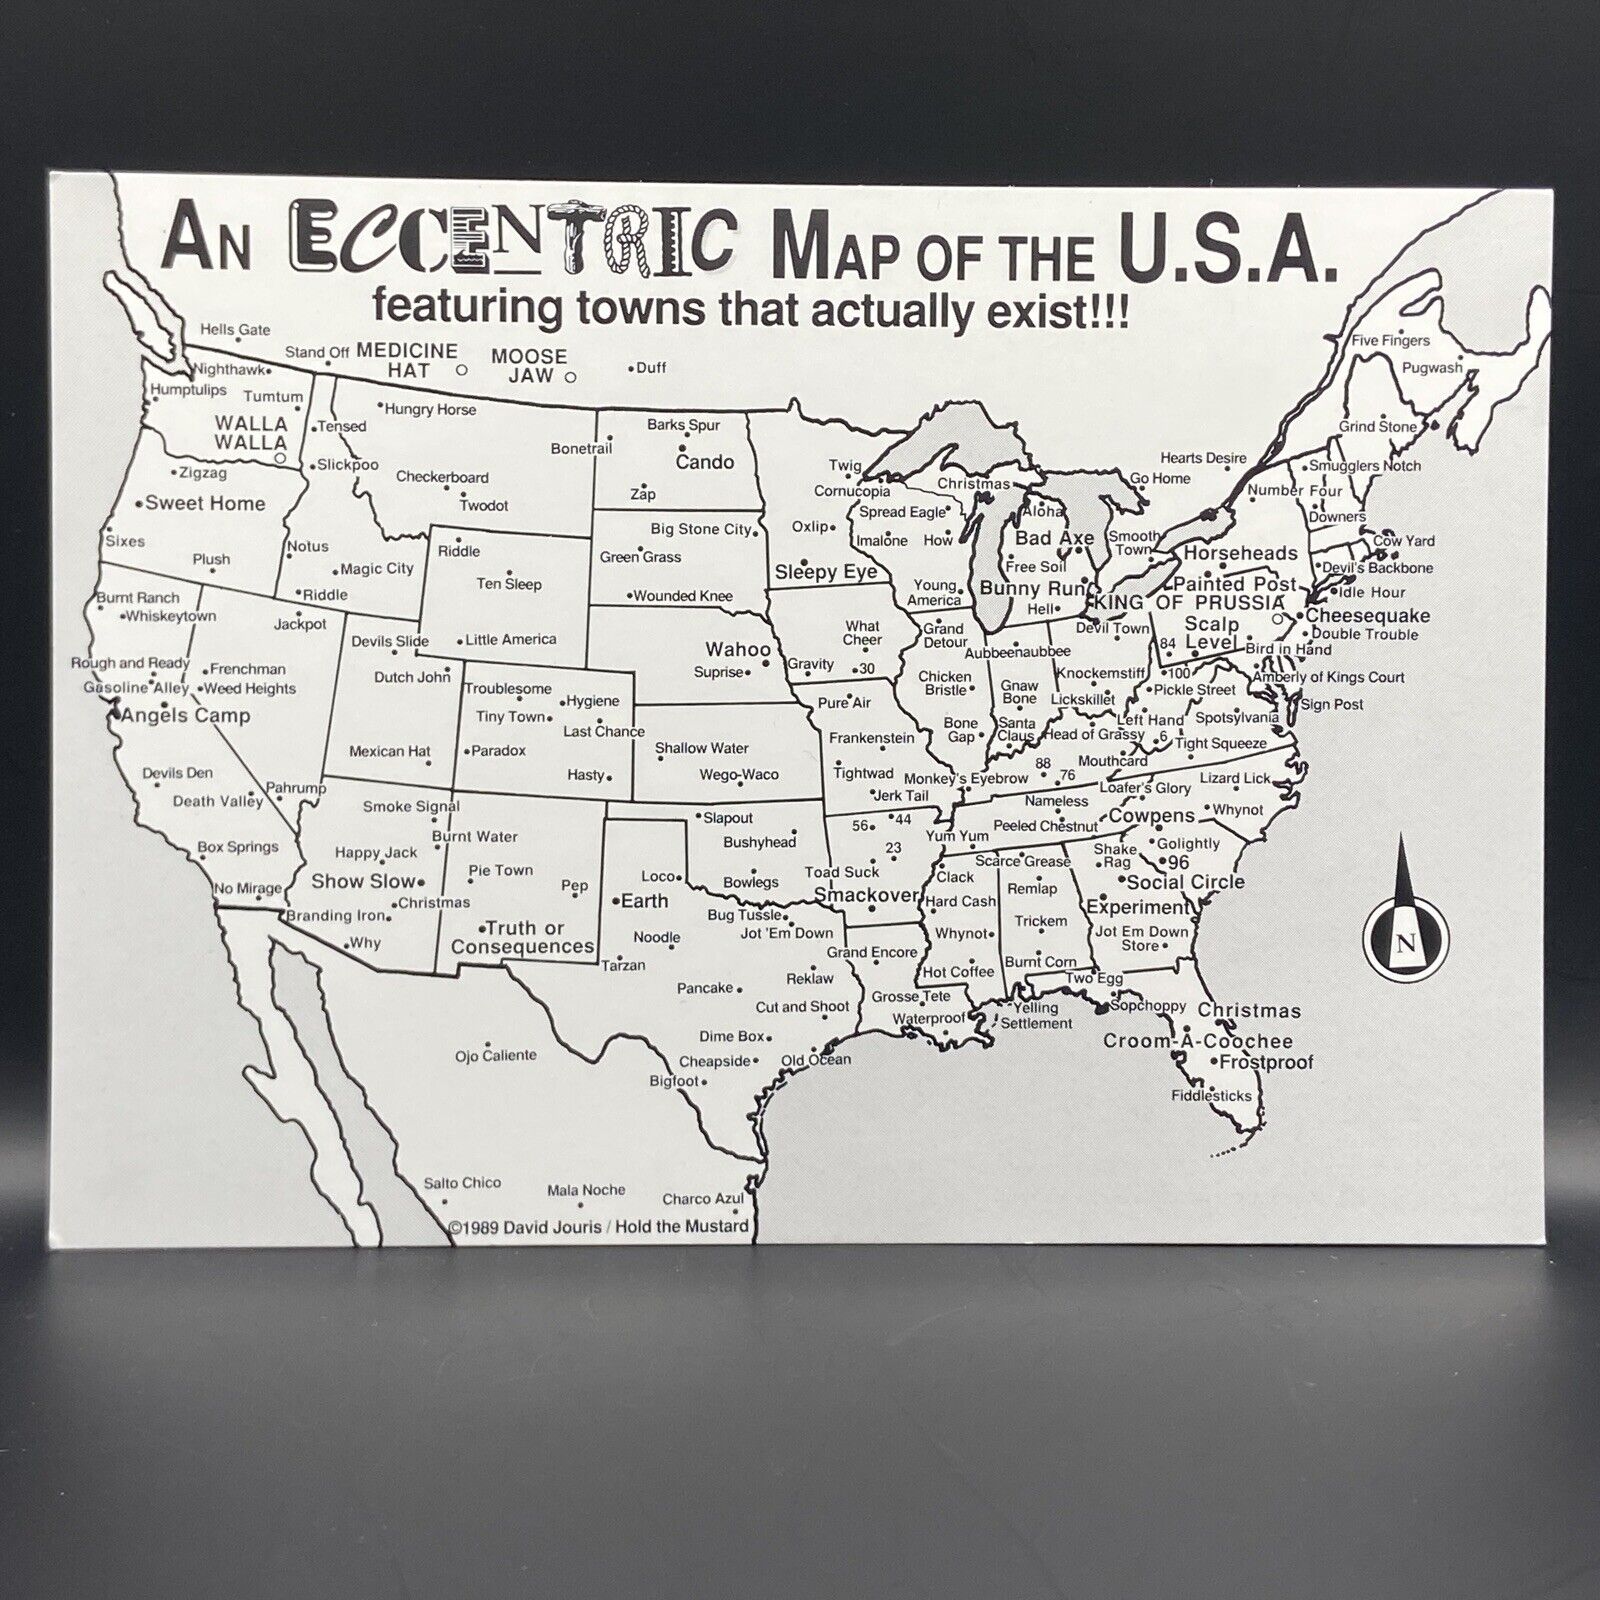 Eccentric Map Of The USA -Towns That Actually Exist - Funny Vintage Postcard